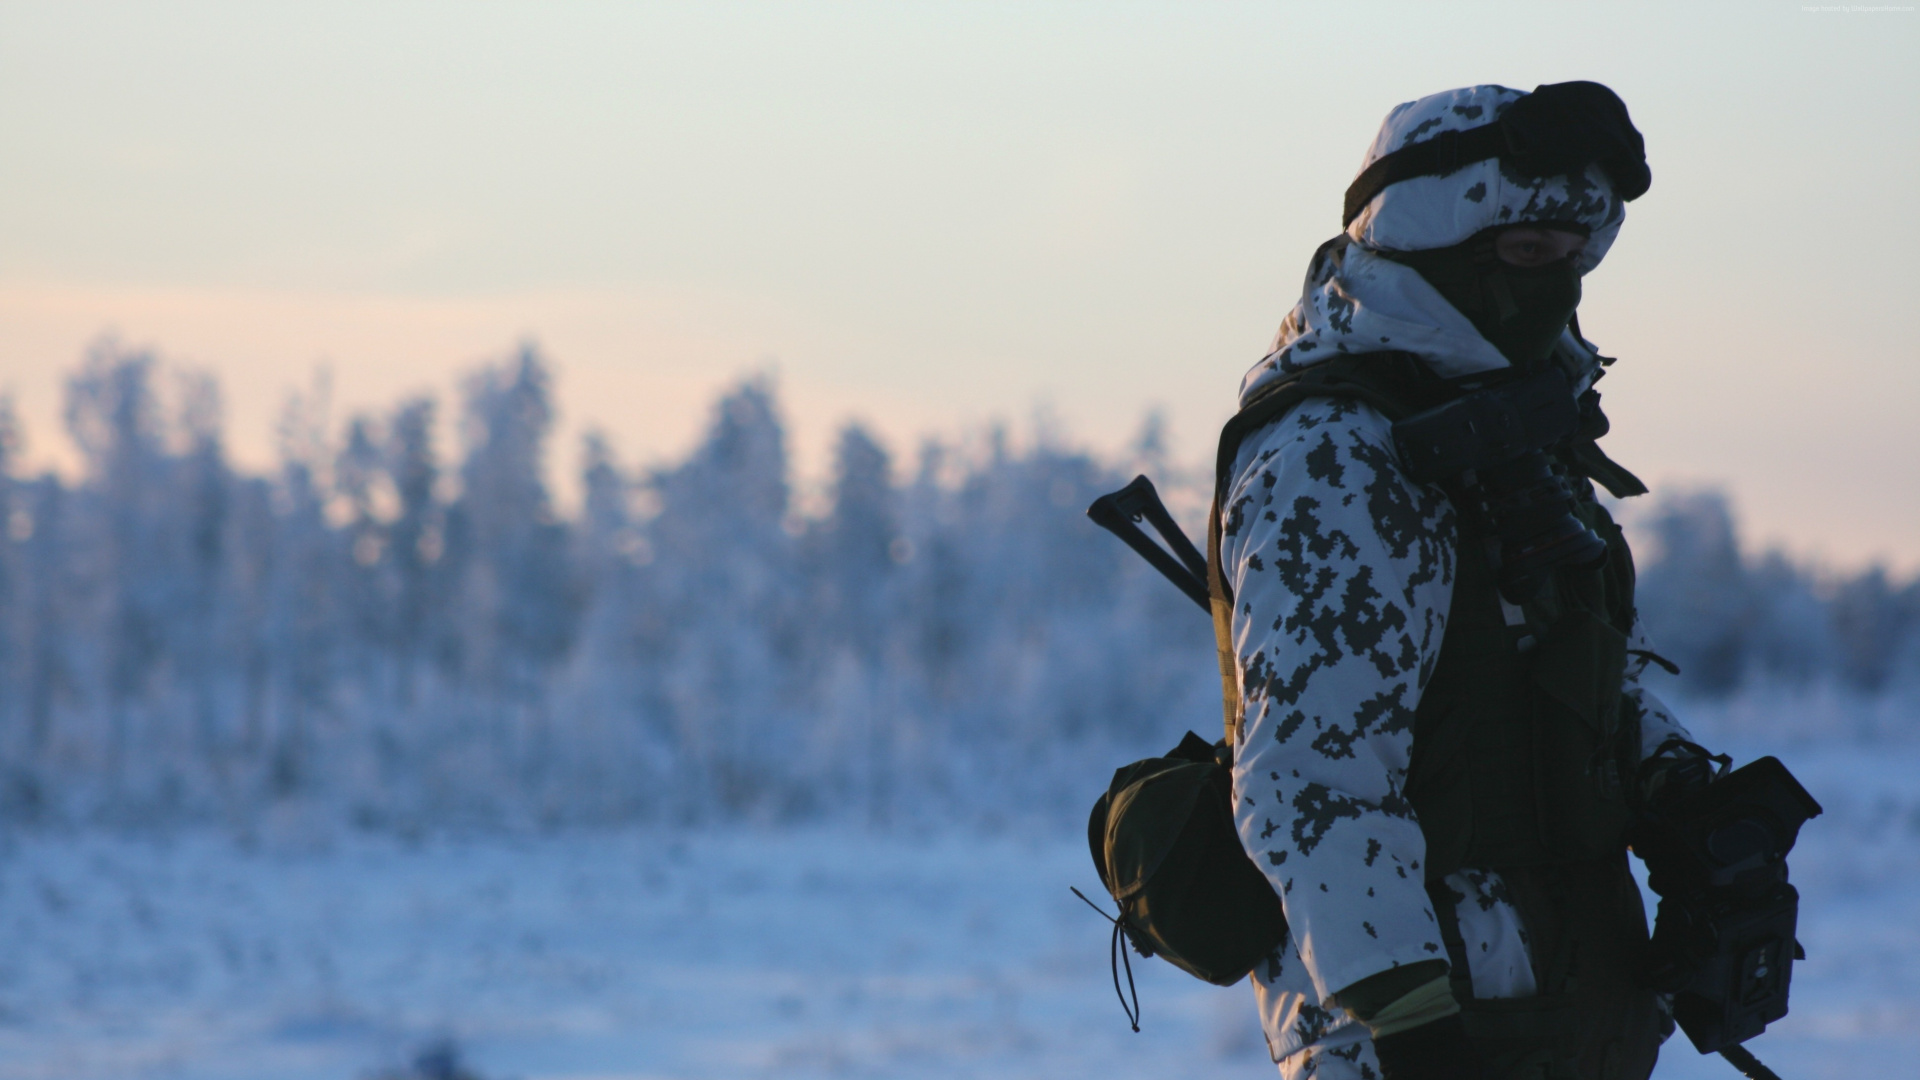 Soldier, Snow, Winter, Freezing, Arctic. Wallpaper in 1920x1080 Resolution